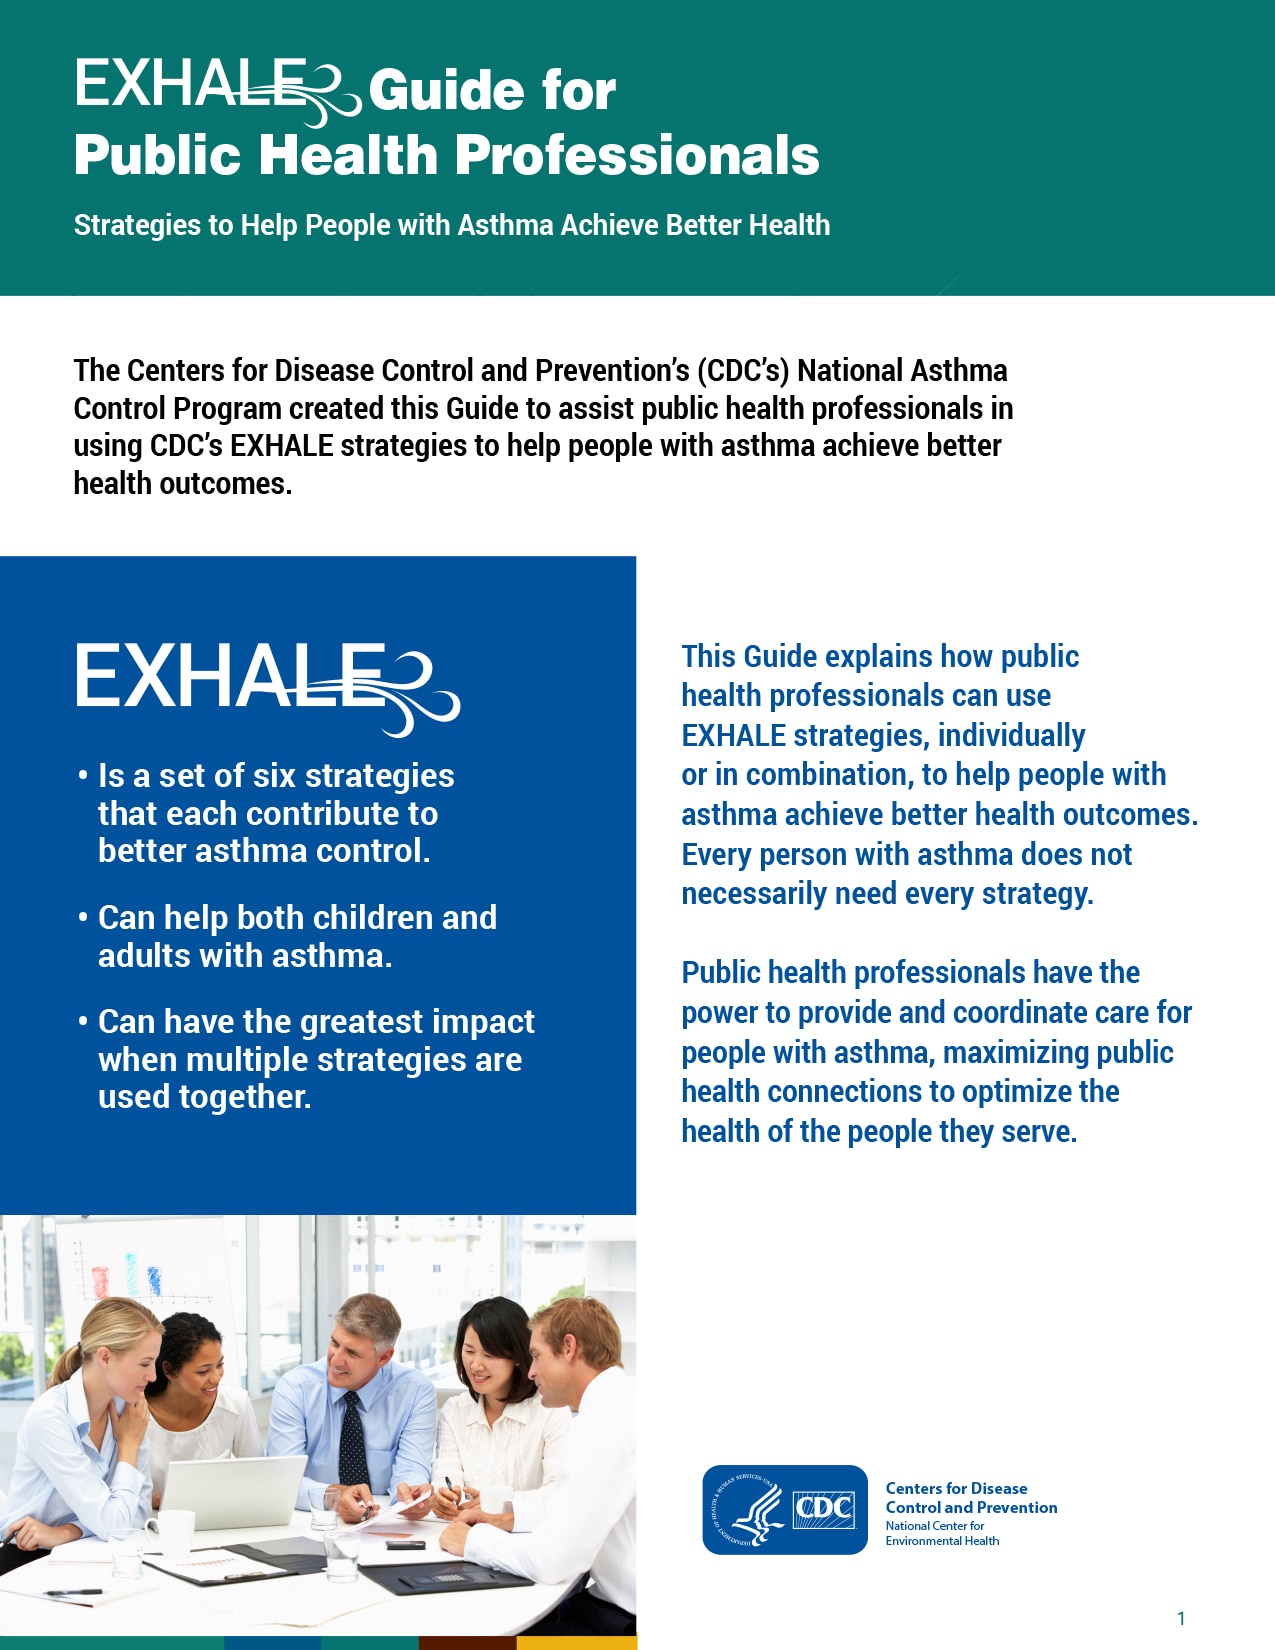 EXHALE Guide for Public Health Professionals